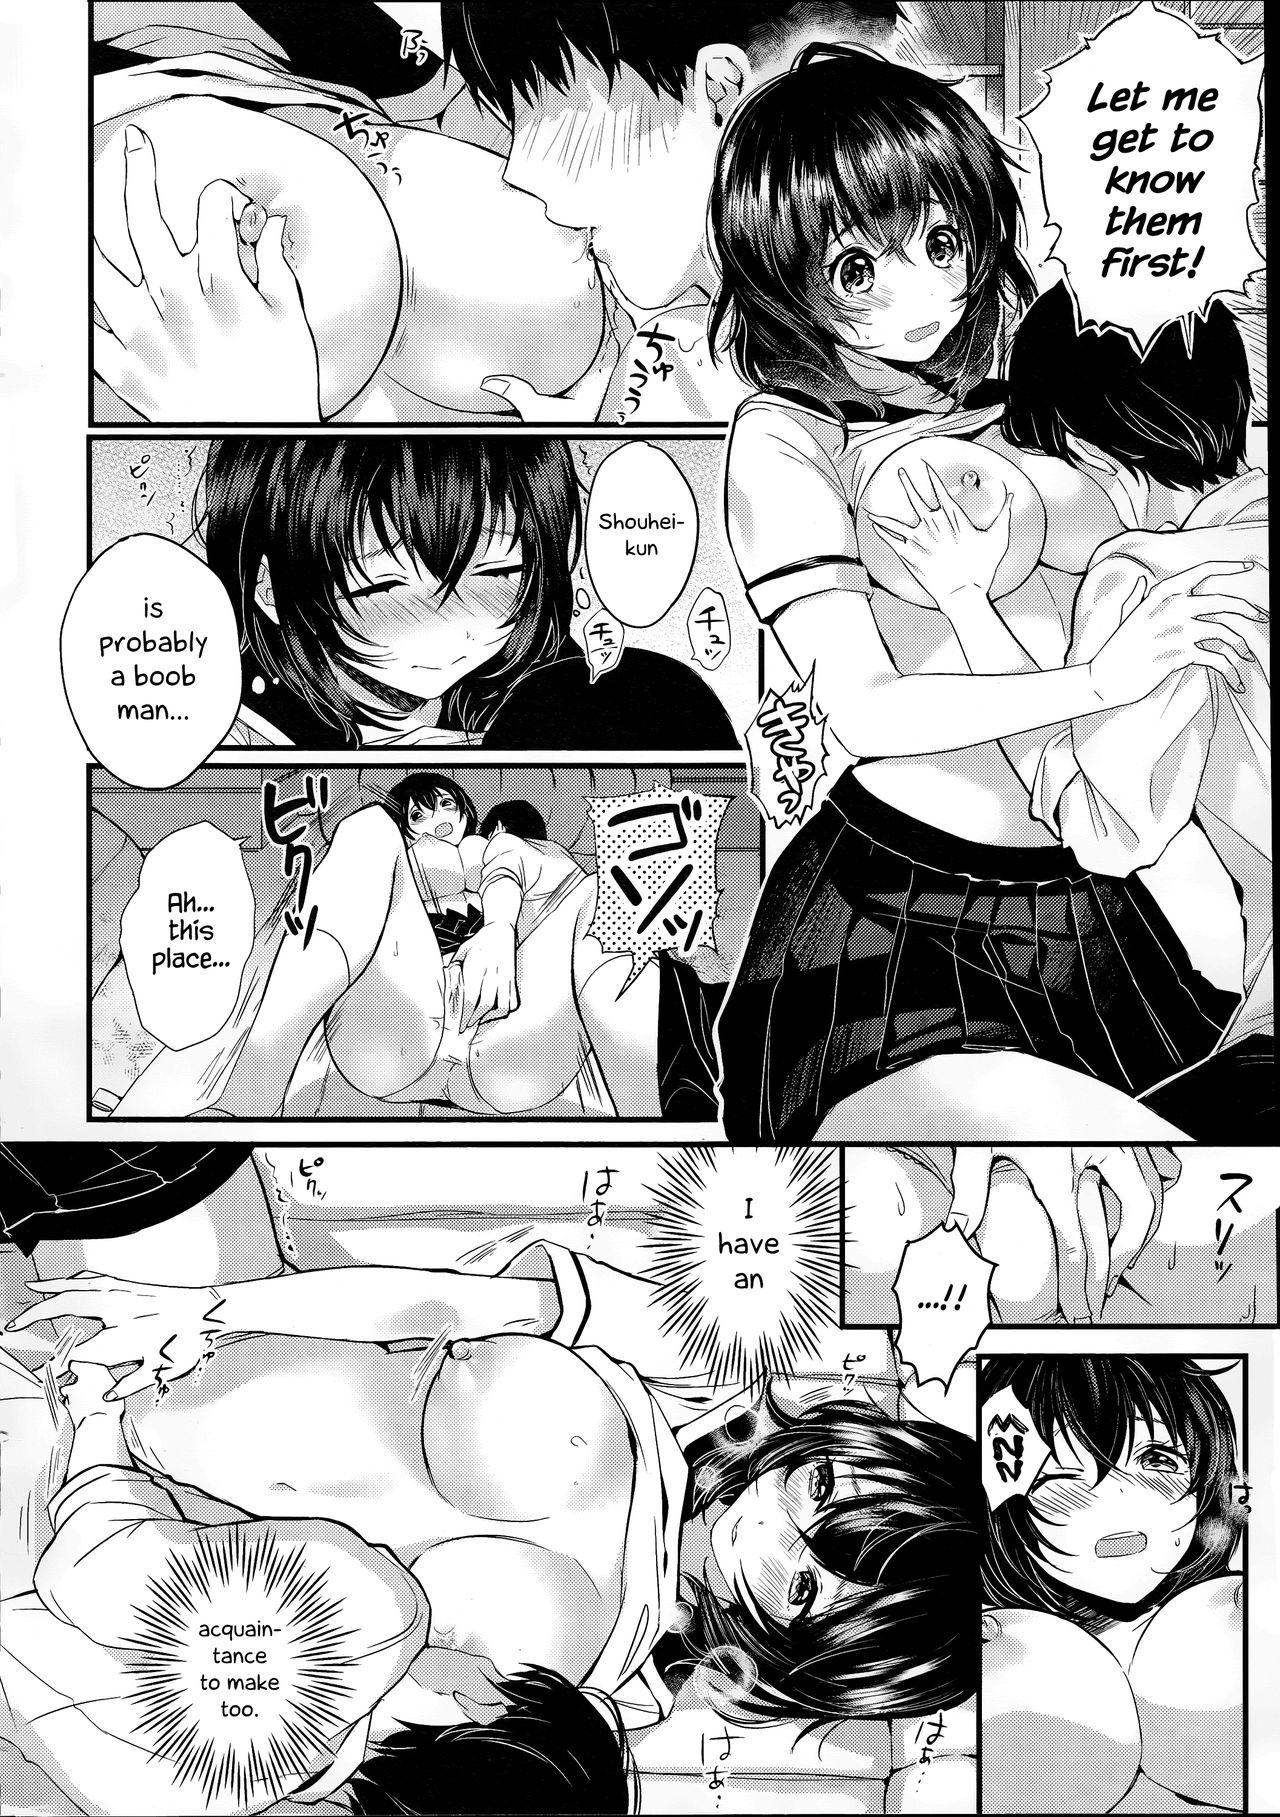 Fleshlight Unmei no Kokuhaku | The Destined Confession Interview - Page 8